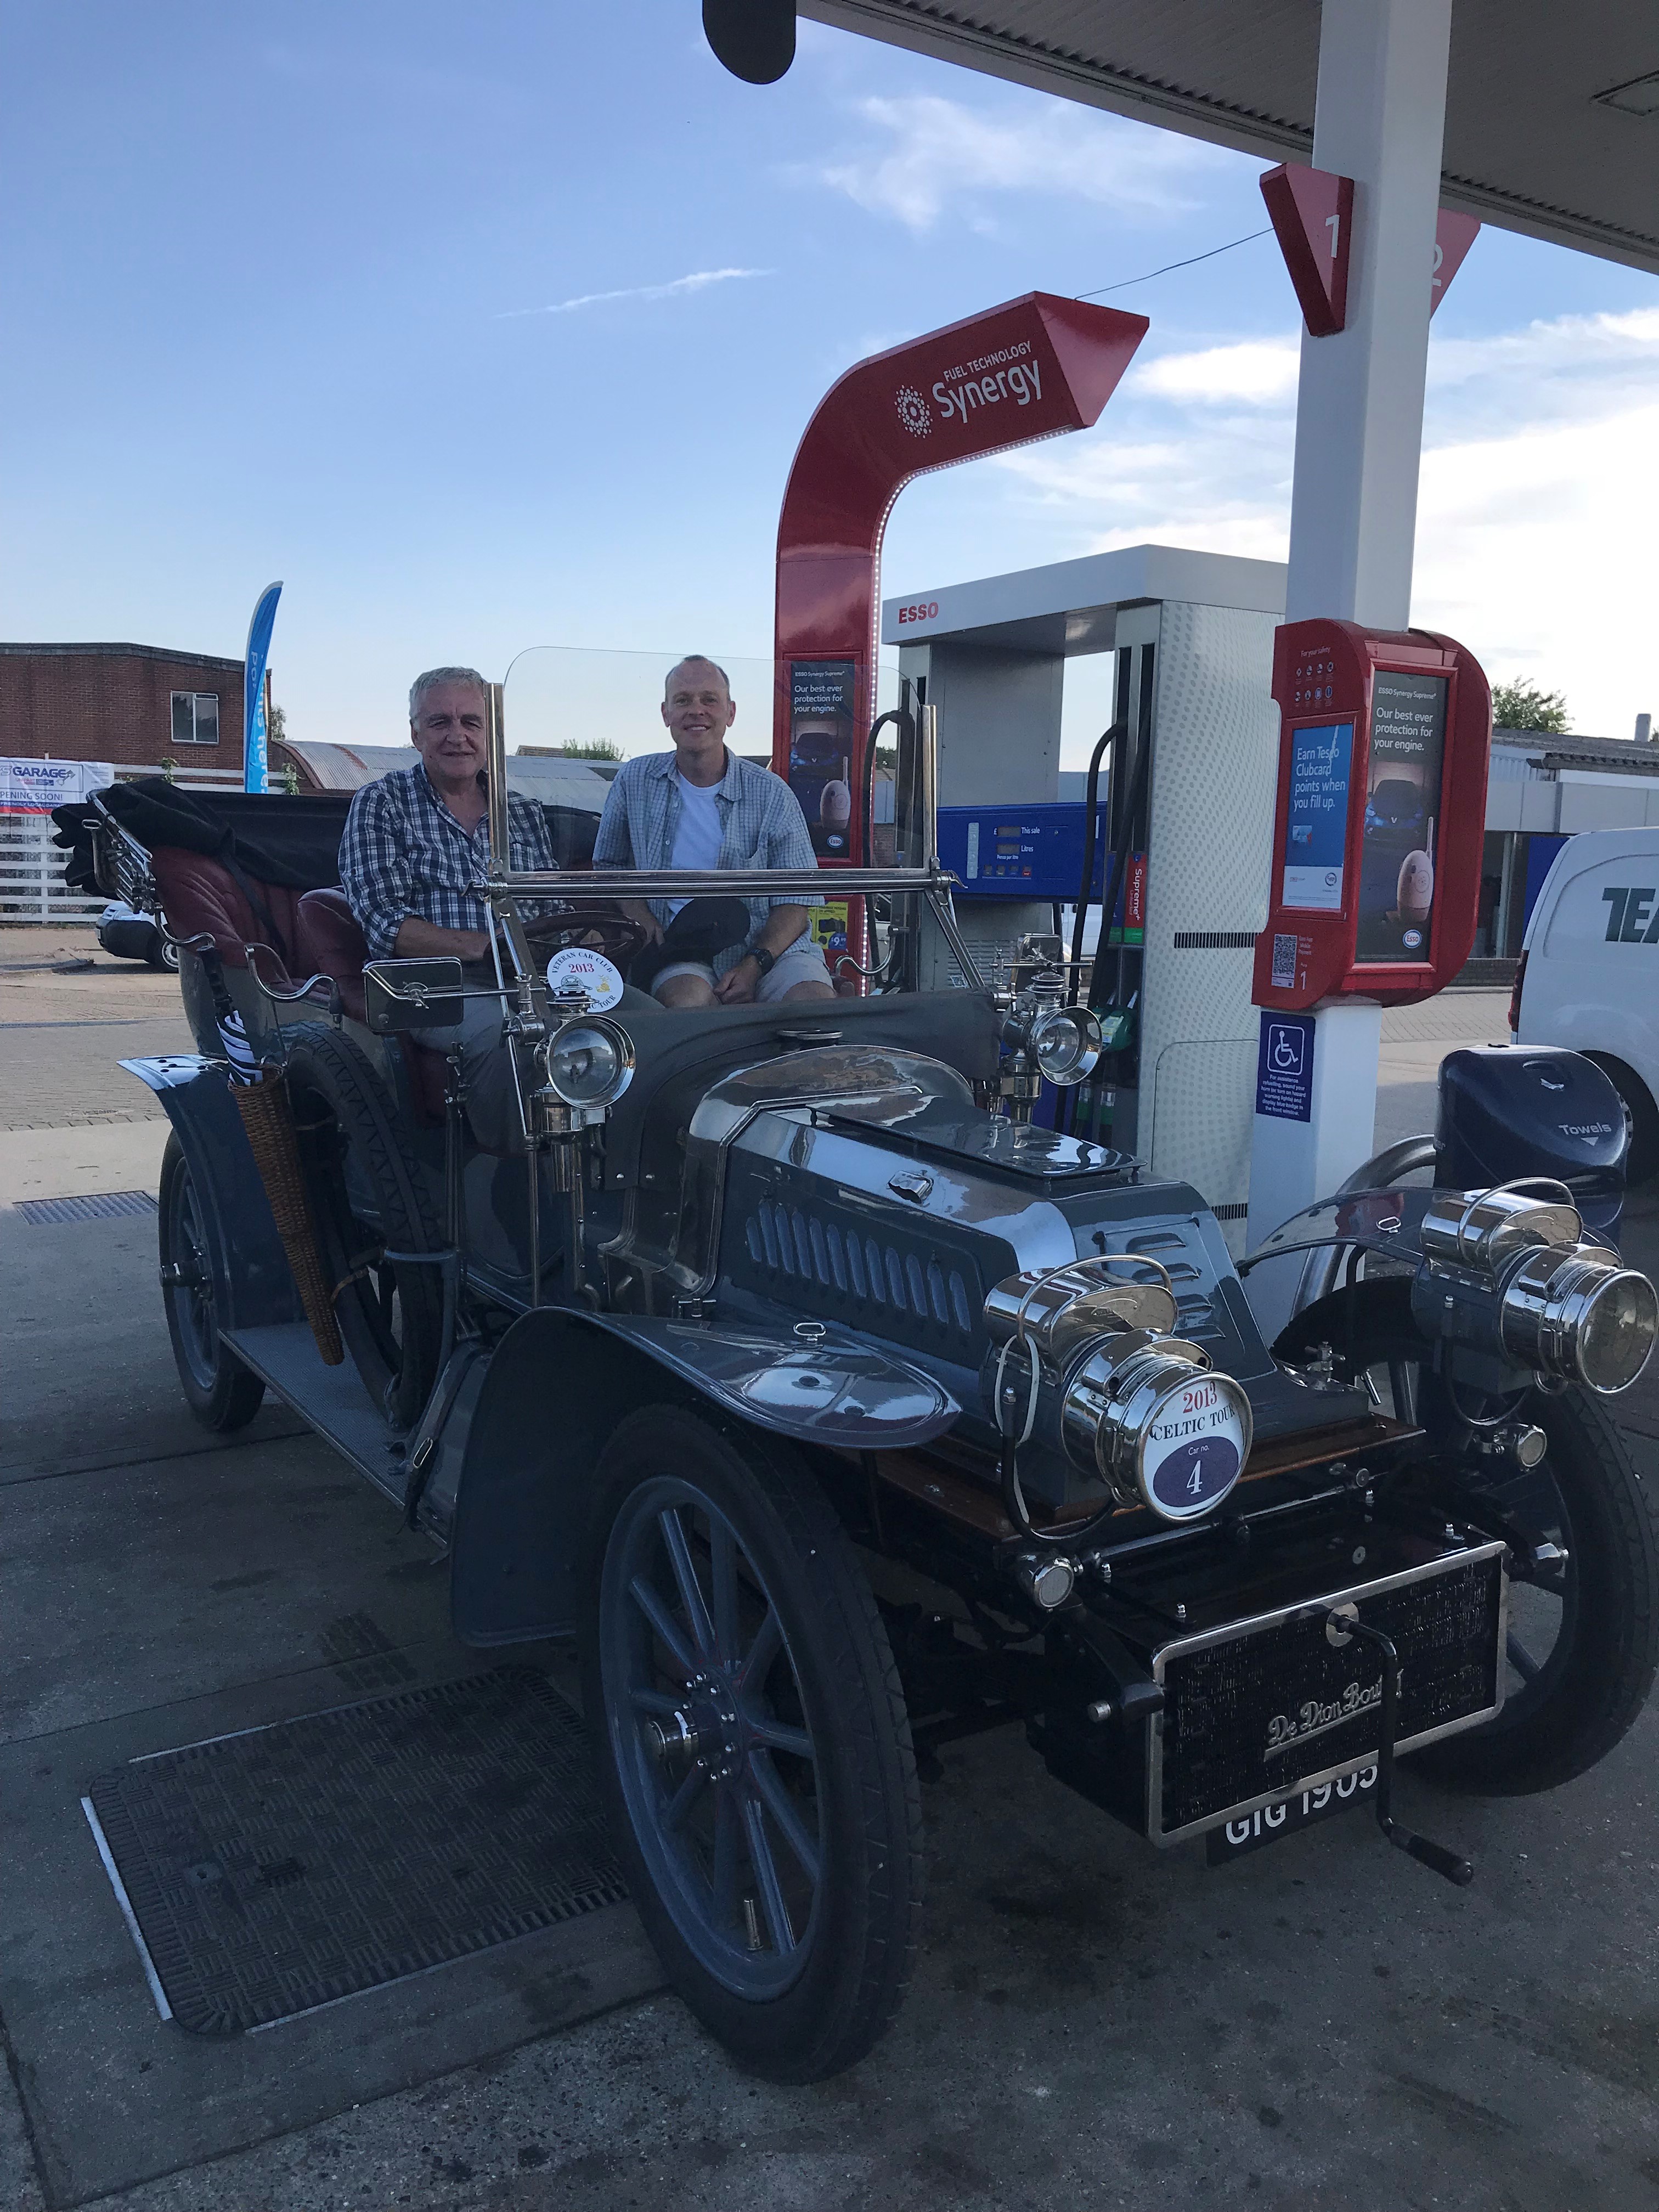 Image Mark (left) and his successor in the RRT, Travis Hansen, know which brand serves the best petrol for vintage cars